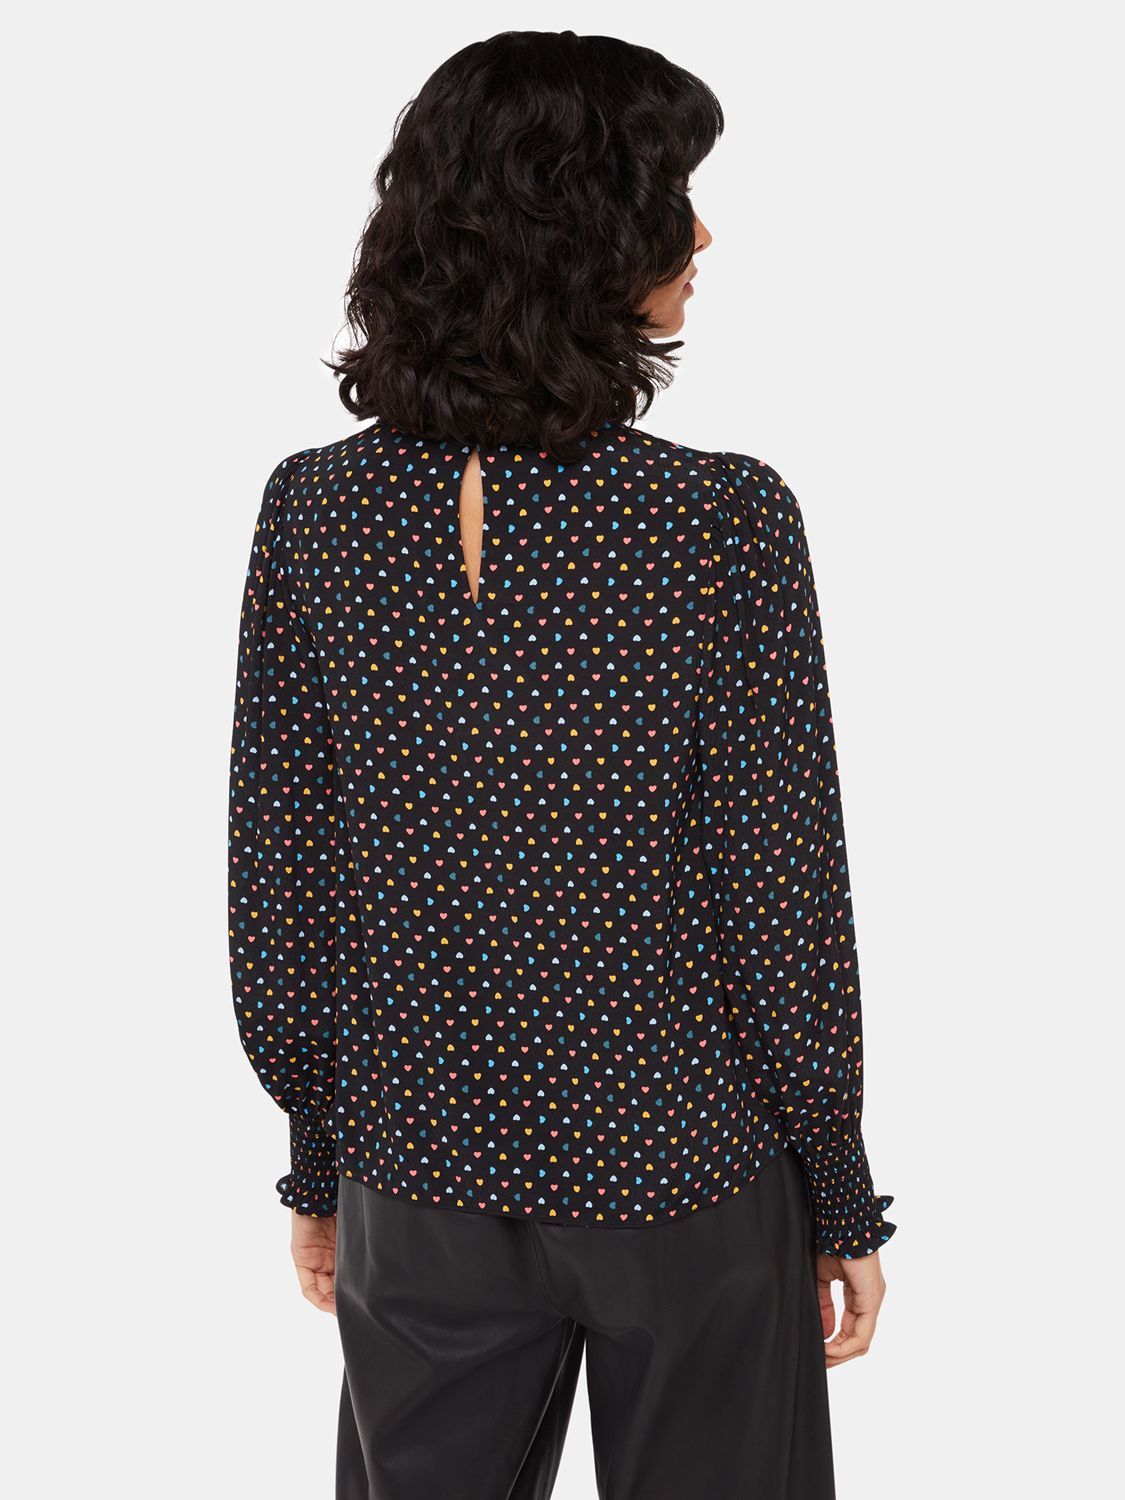 Whistles Scattered Hearts Blouse, Black/Multi at John Lewis & Partners